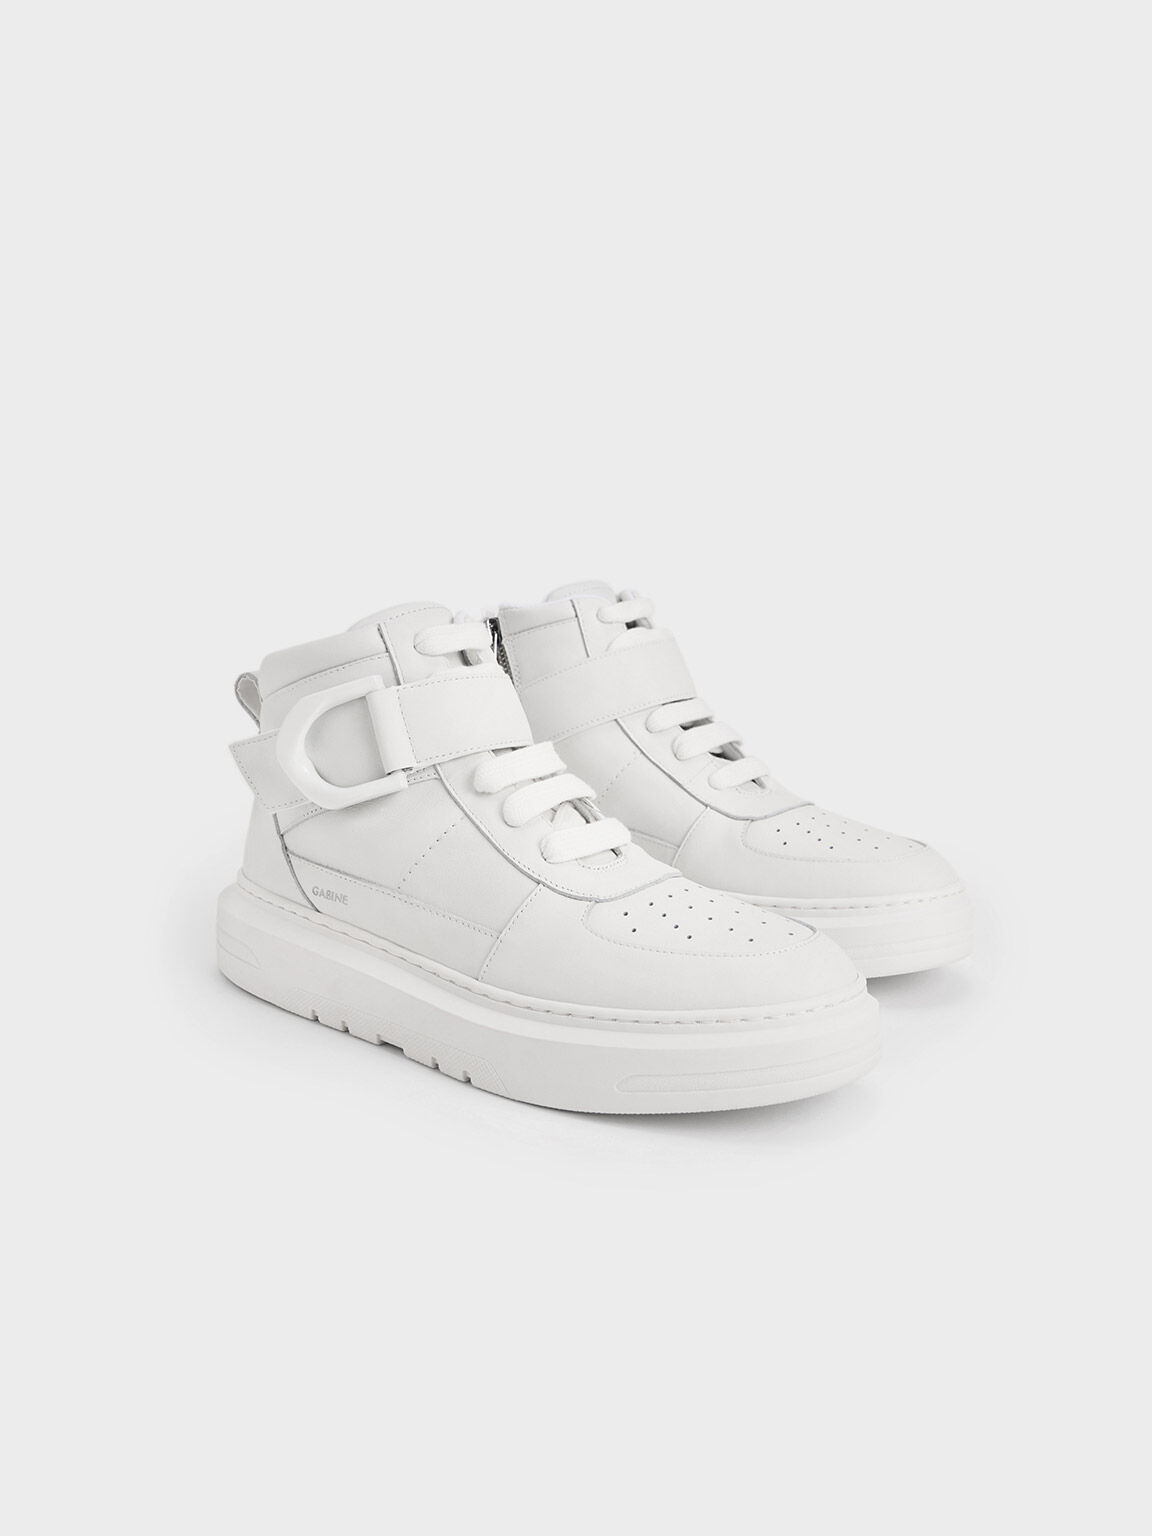 Gabine Leather High-Top Sneakers, White, hi-res